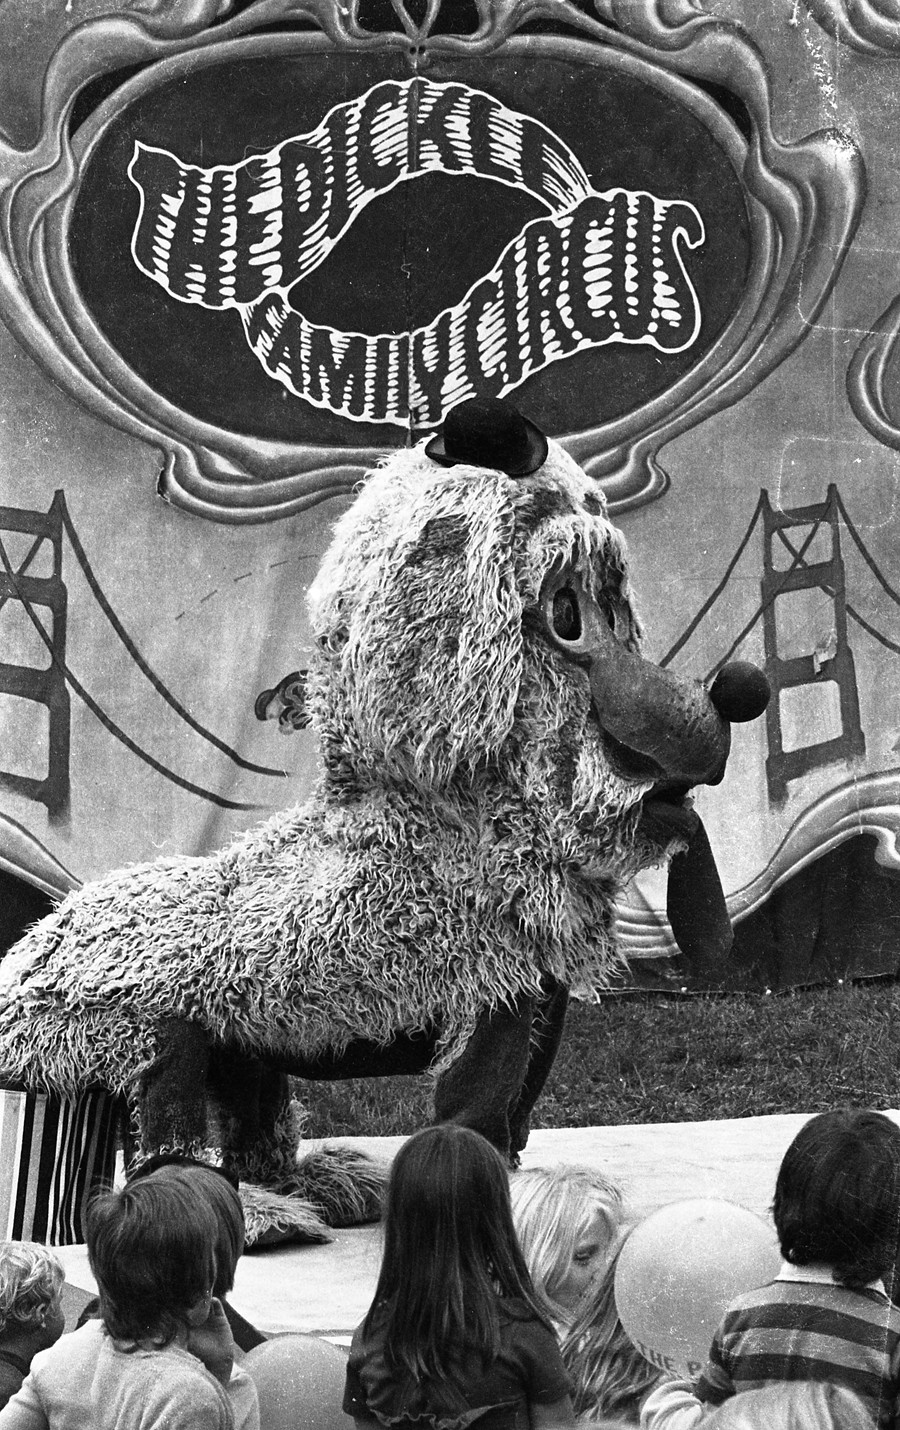 Pickle Family Circus, 1970s